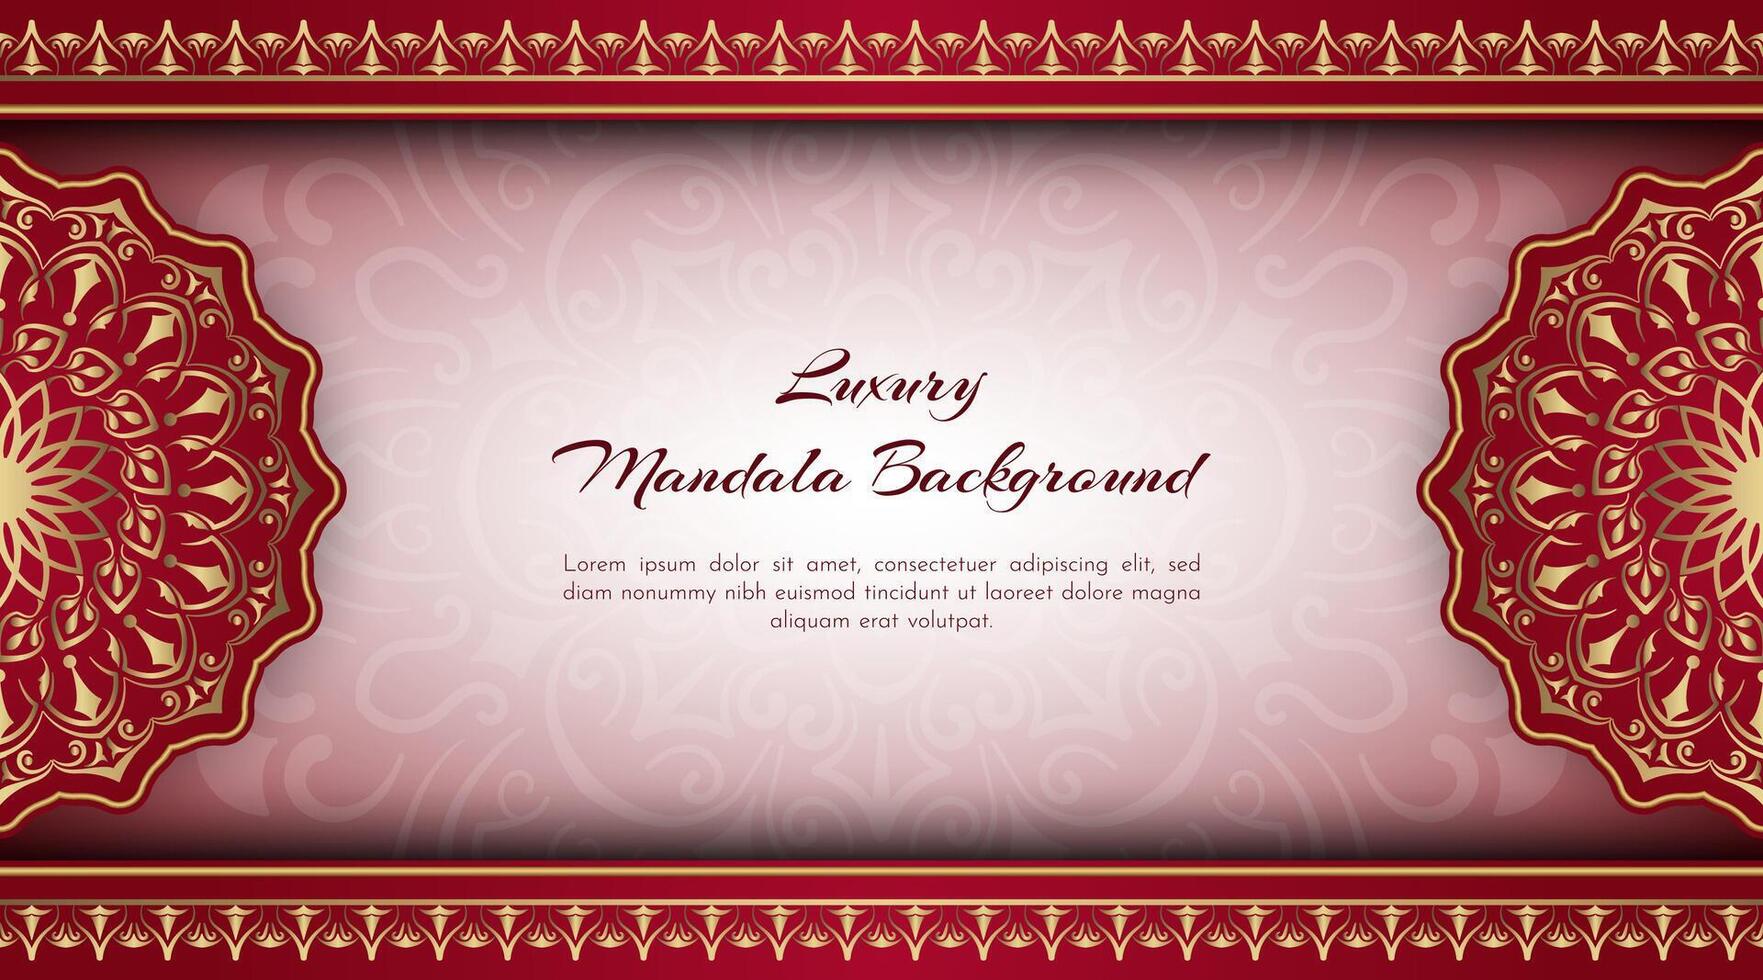 Vintage background, with mandala ornaments vector